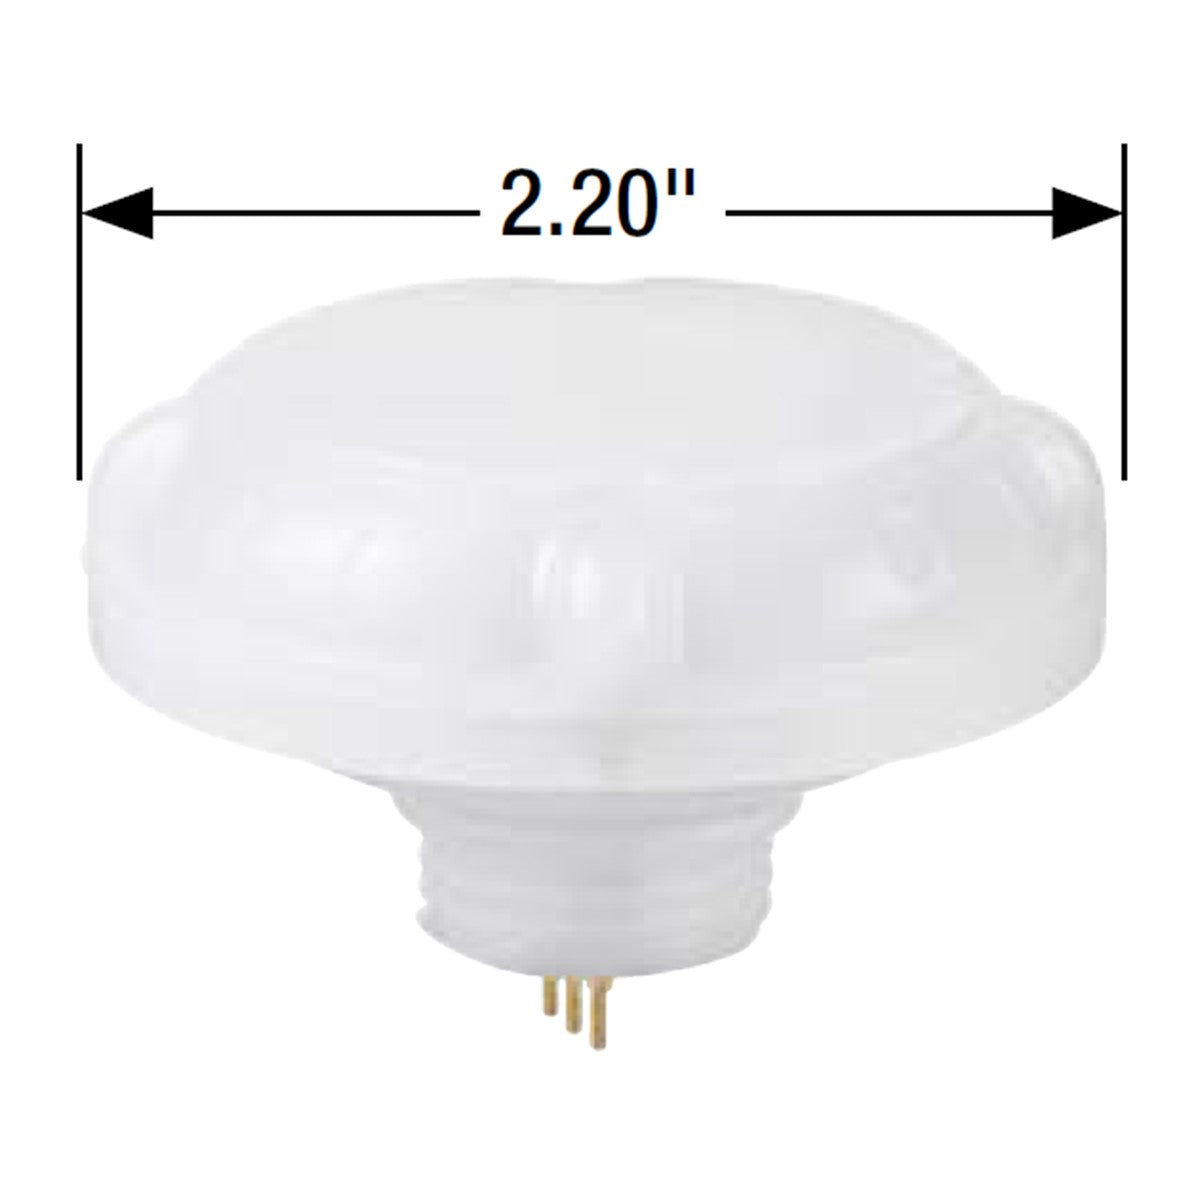 Sylvania High Bay PIR DC Motion/Daylight Sensor, Remote Required To Change Default Settings